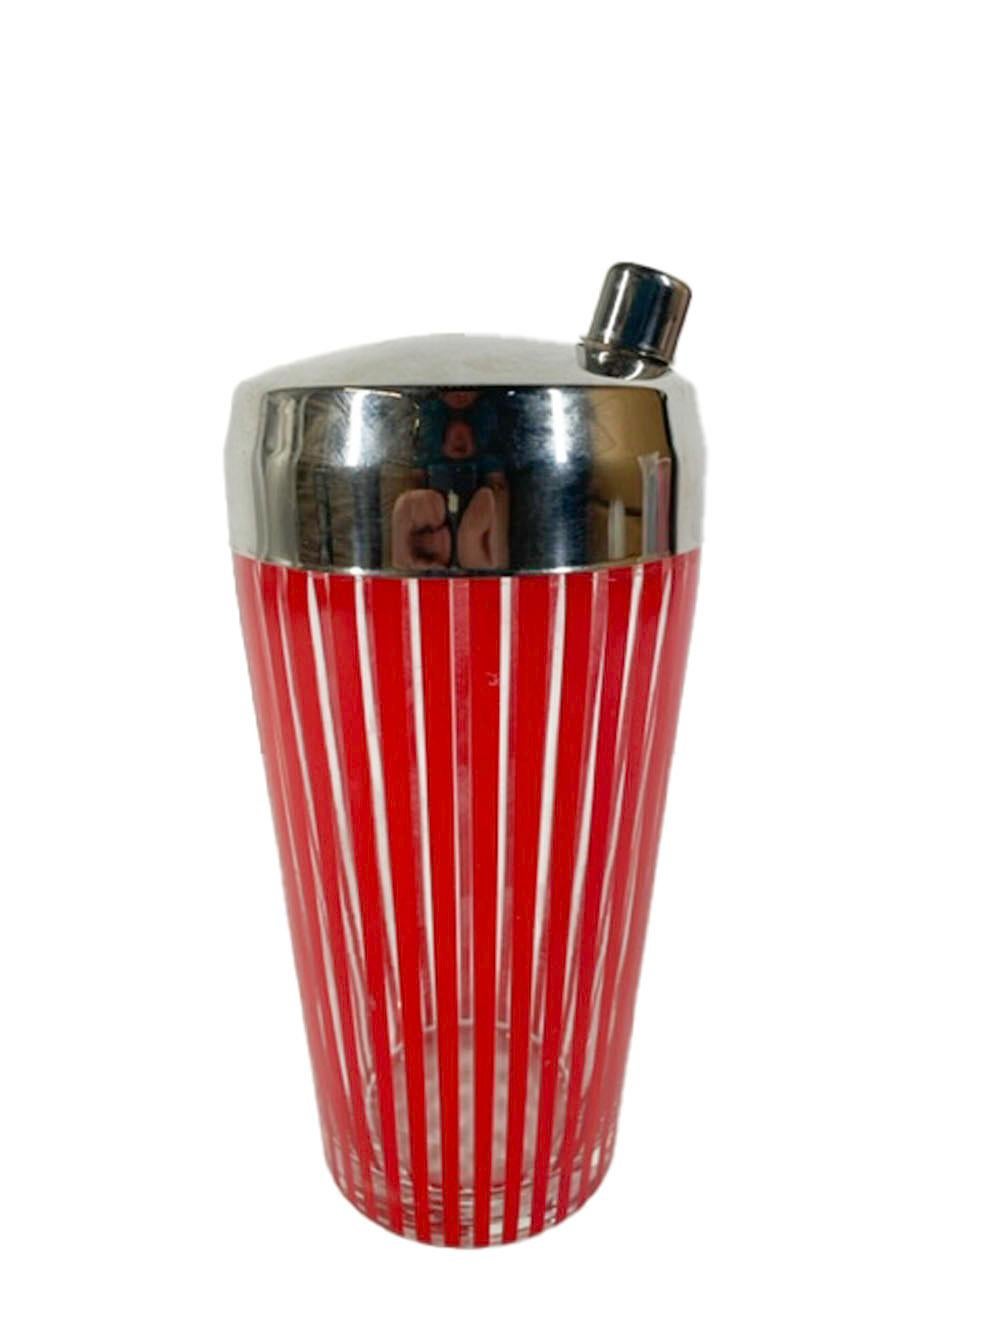 Vintage cocktail shaker of clear glass with a chrome lid and decorated with bright red enamel vertical lines. The chrome lid with an off-center spout and integral strainer.